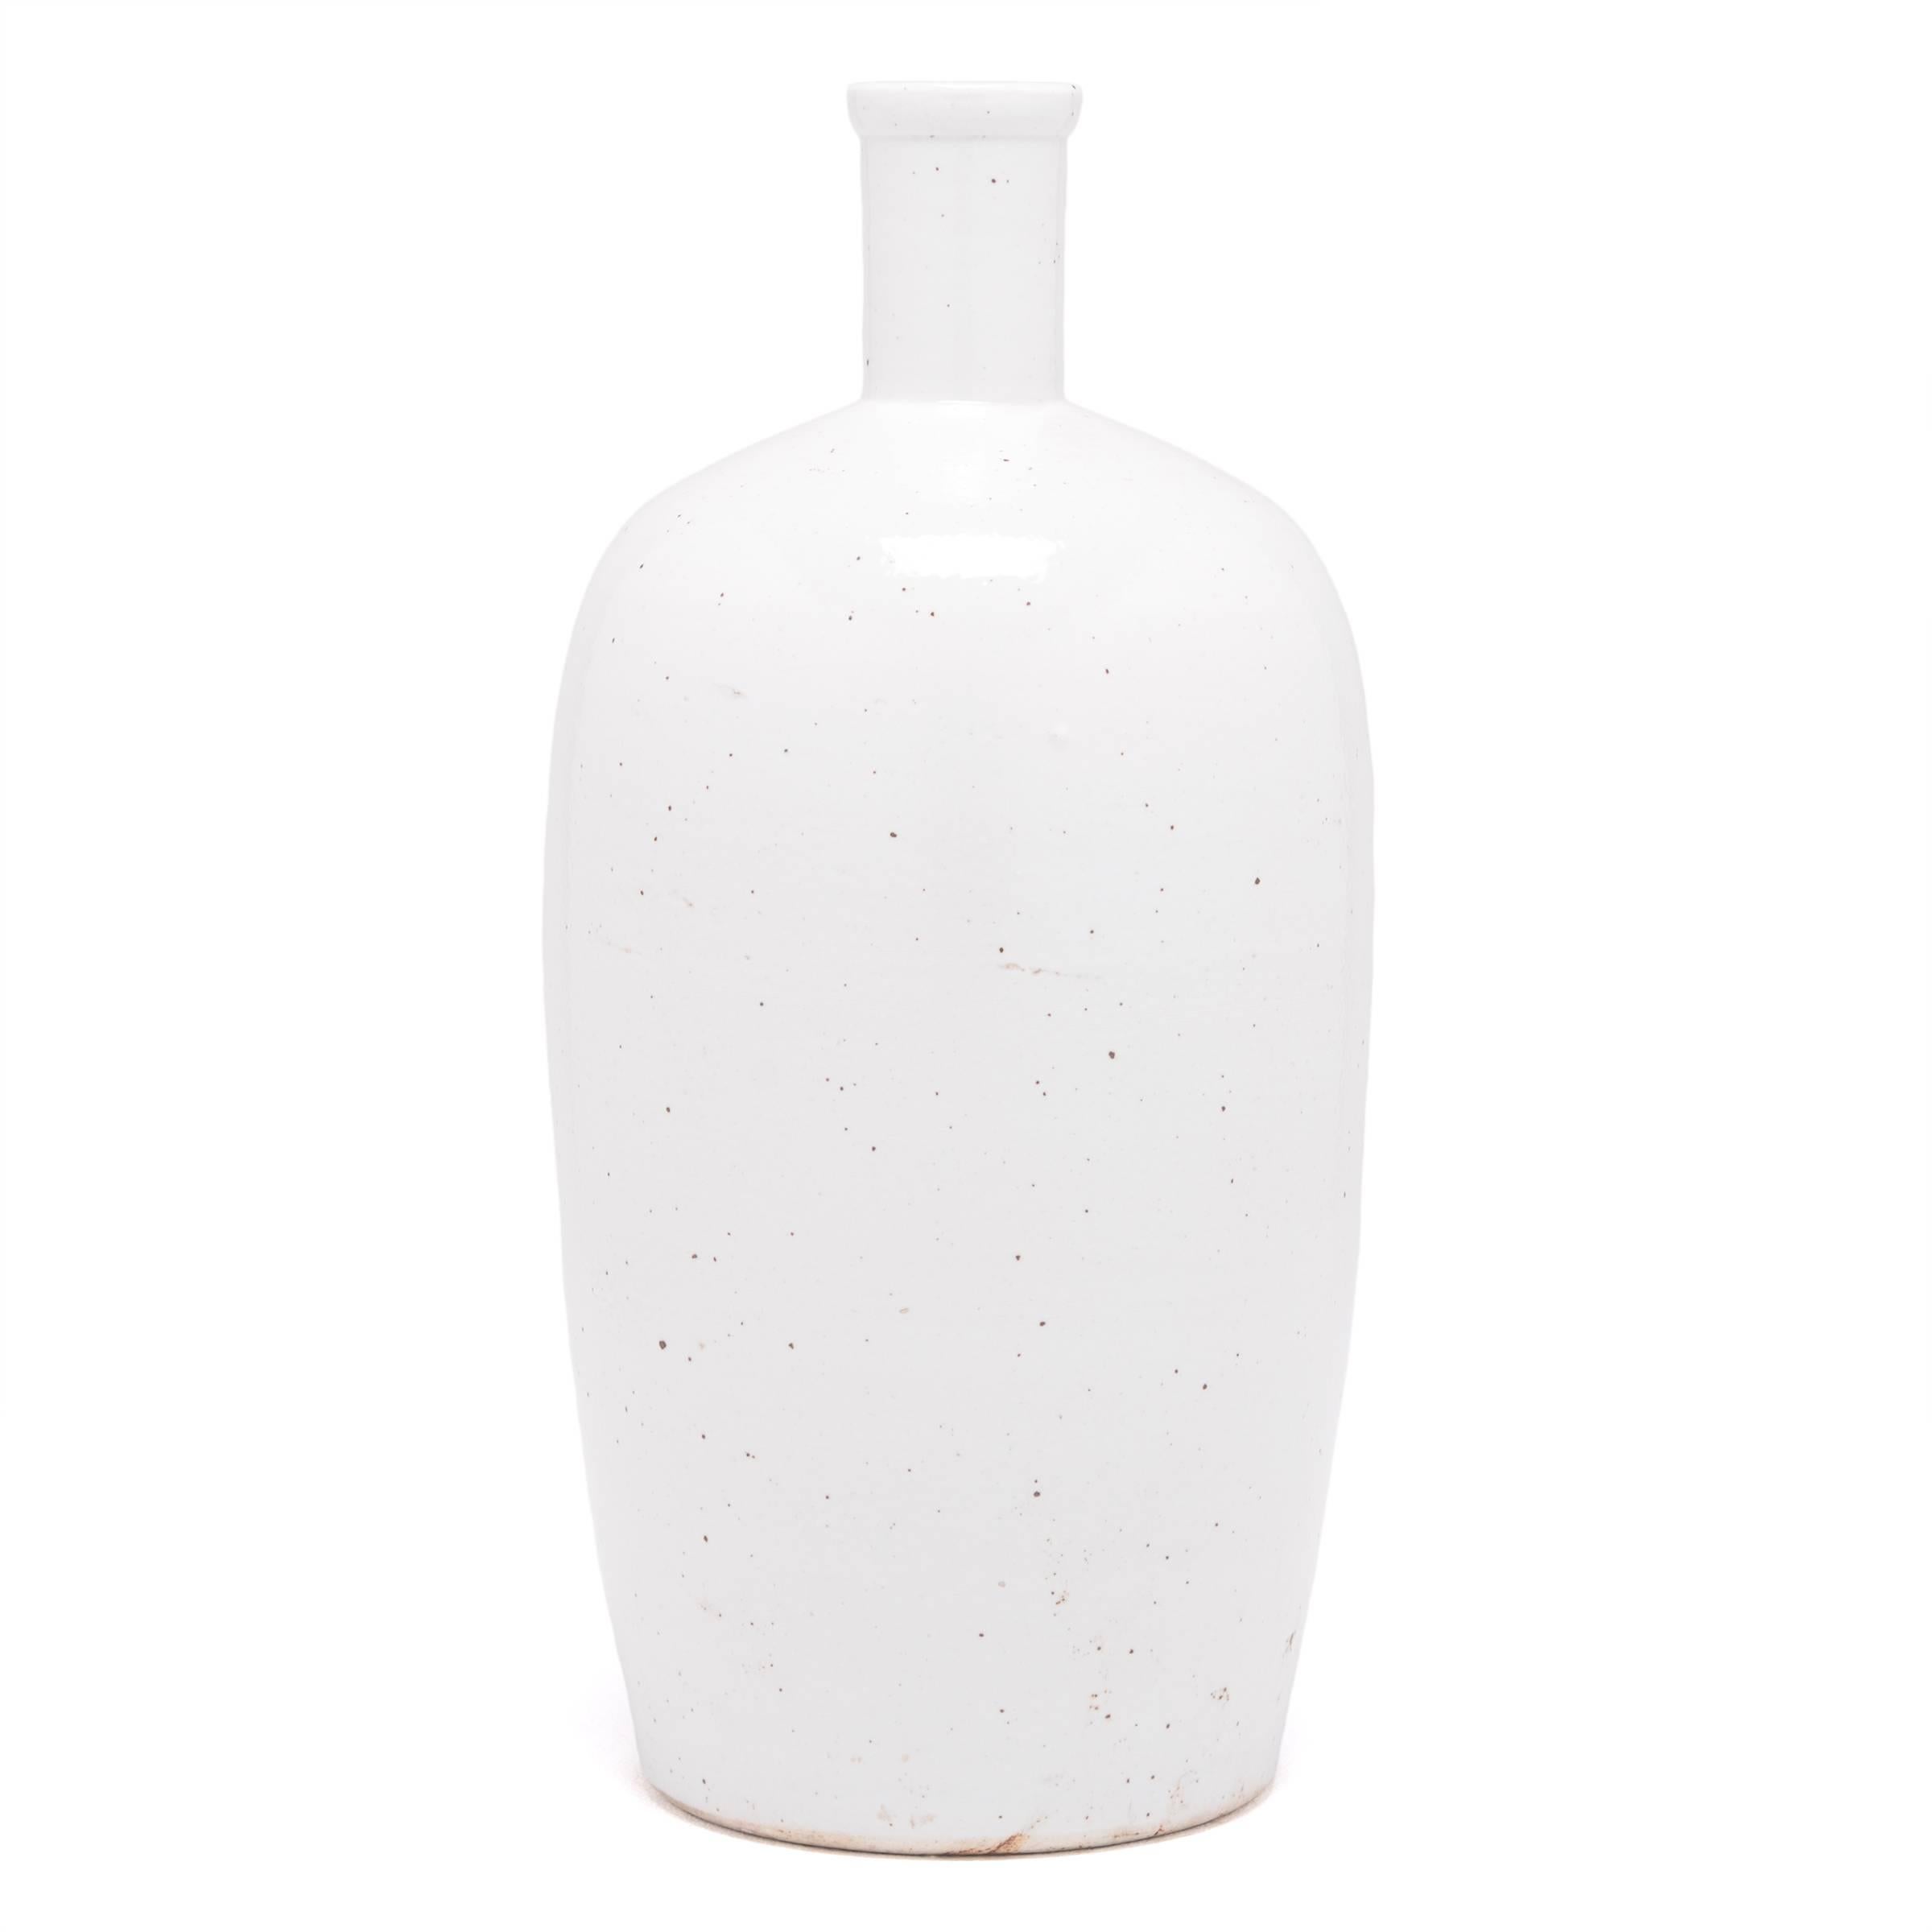 A milky white glaze emphasizes the simple, serene beauty of this contemporary ceramic. Crafted in Jiangxi province in 2015, the vessel refines the traditional bottle shape with clean lines and an understated sculptural presence.

 